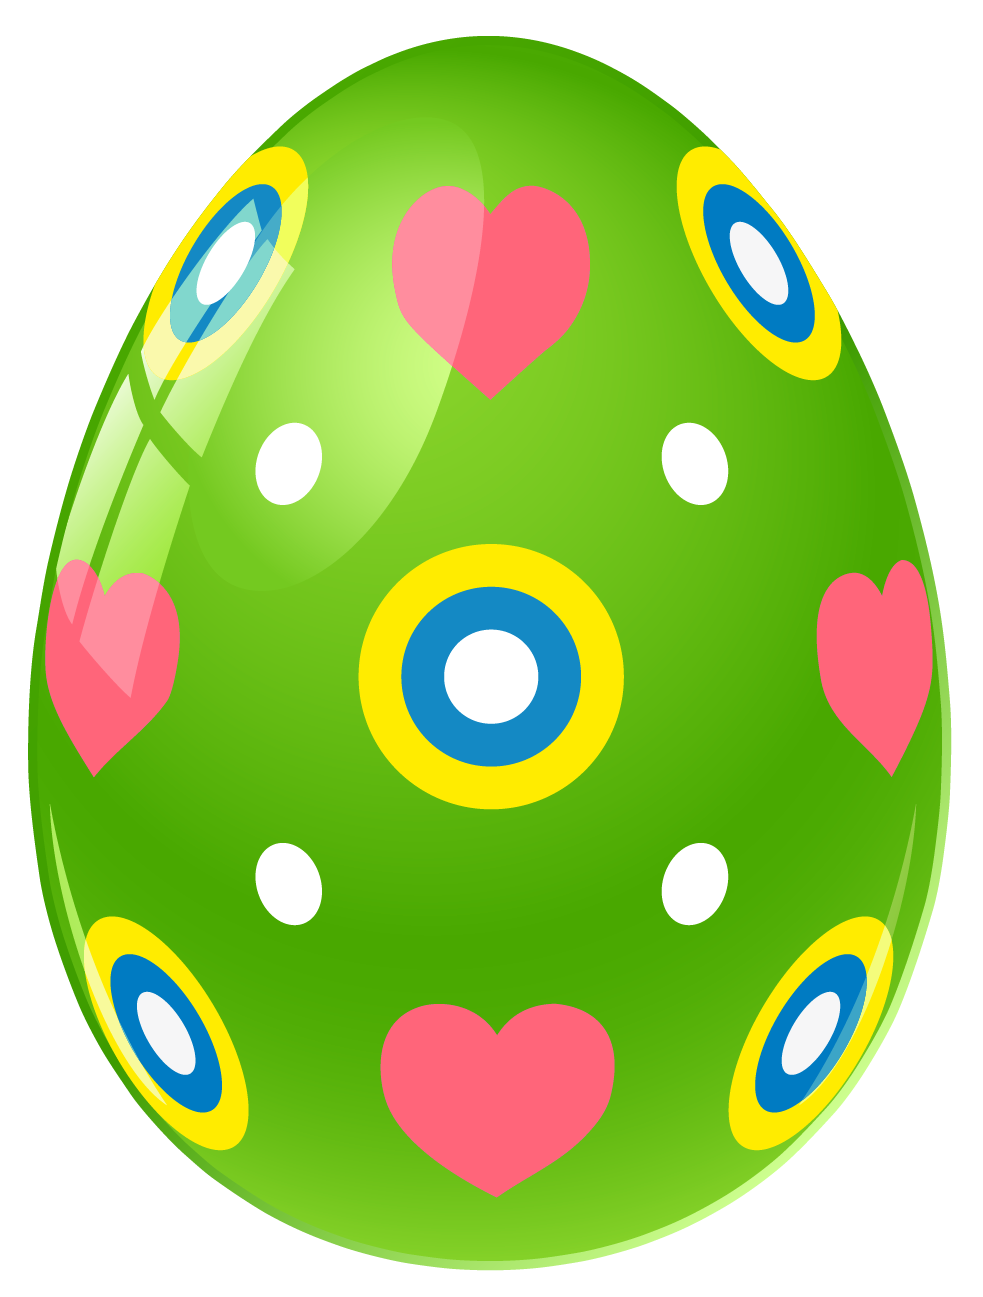 Green Easter Egg With Hearts  - Free Easter Egg Clip Art